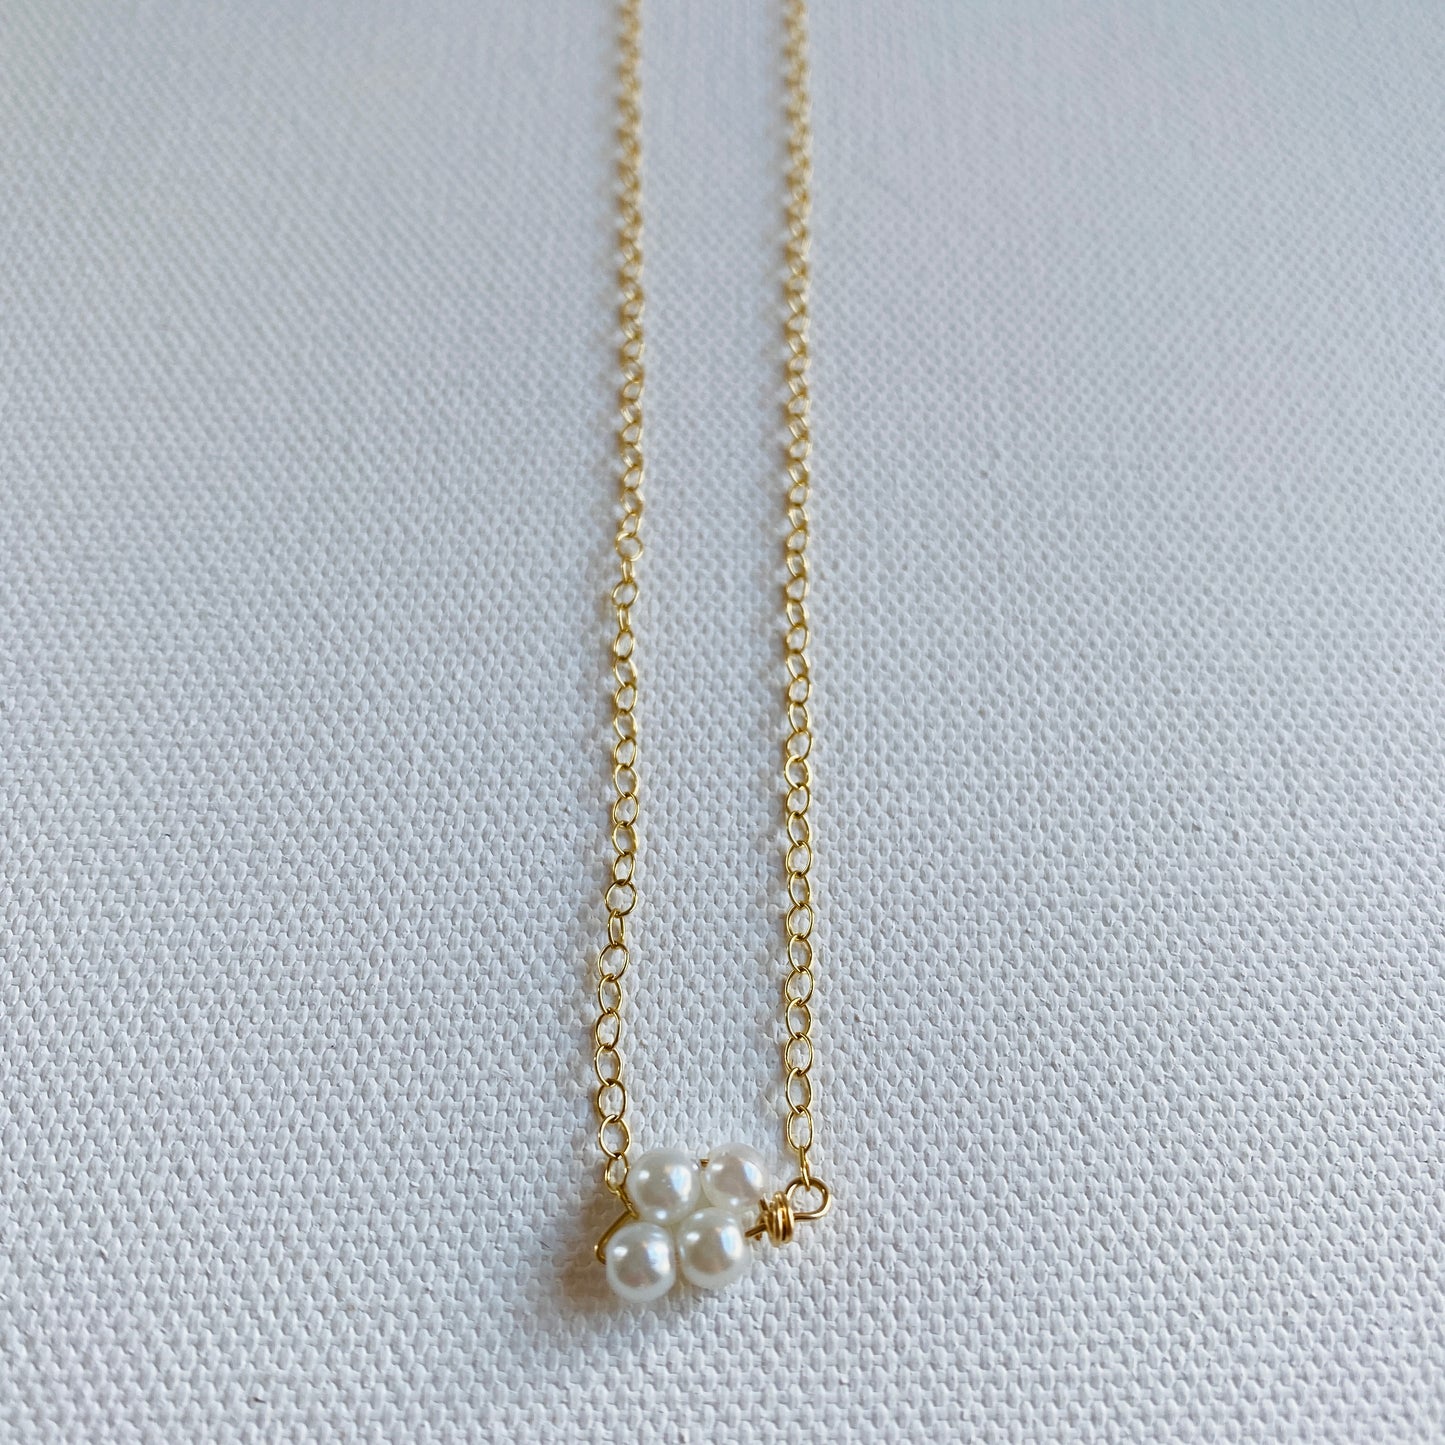 Pearl, Flower, Gold, Delicate, Dainty, Gold Necklace